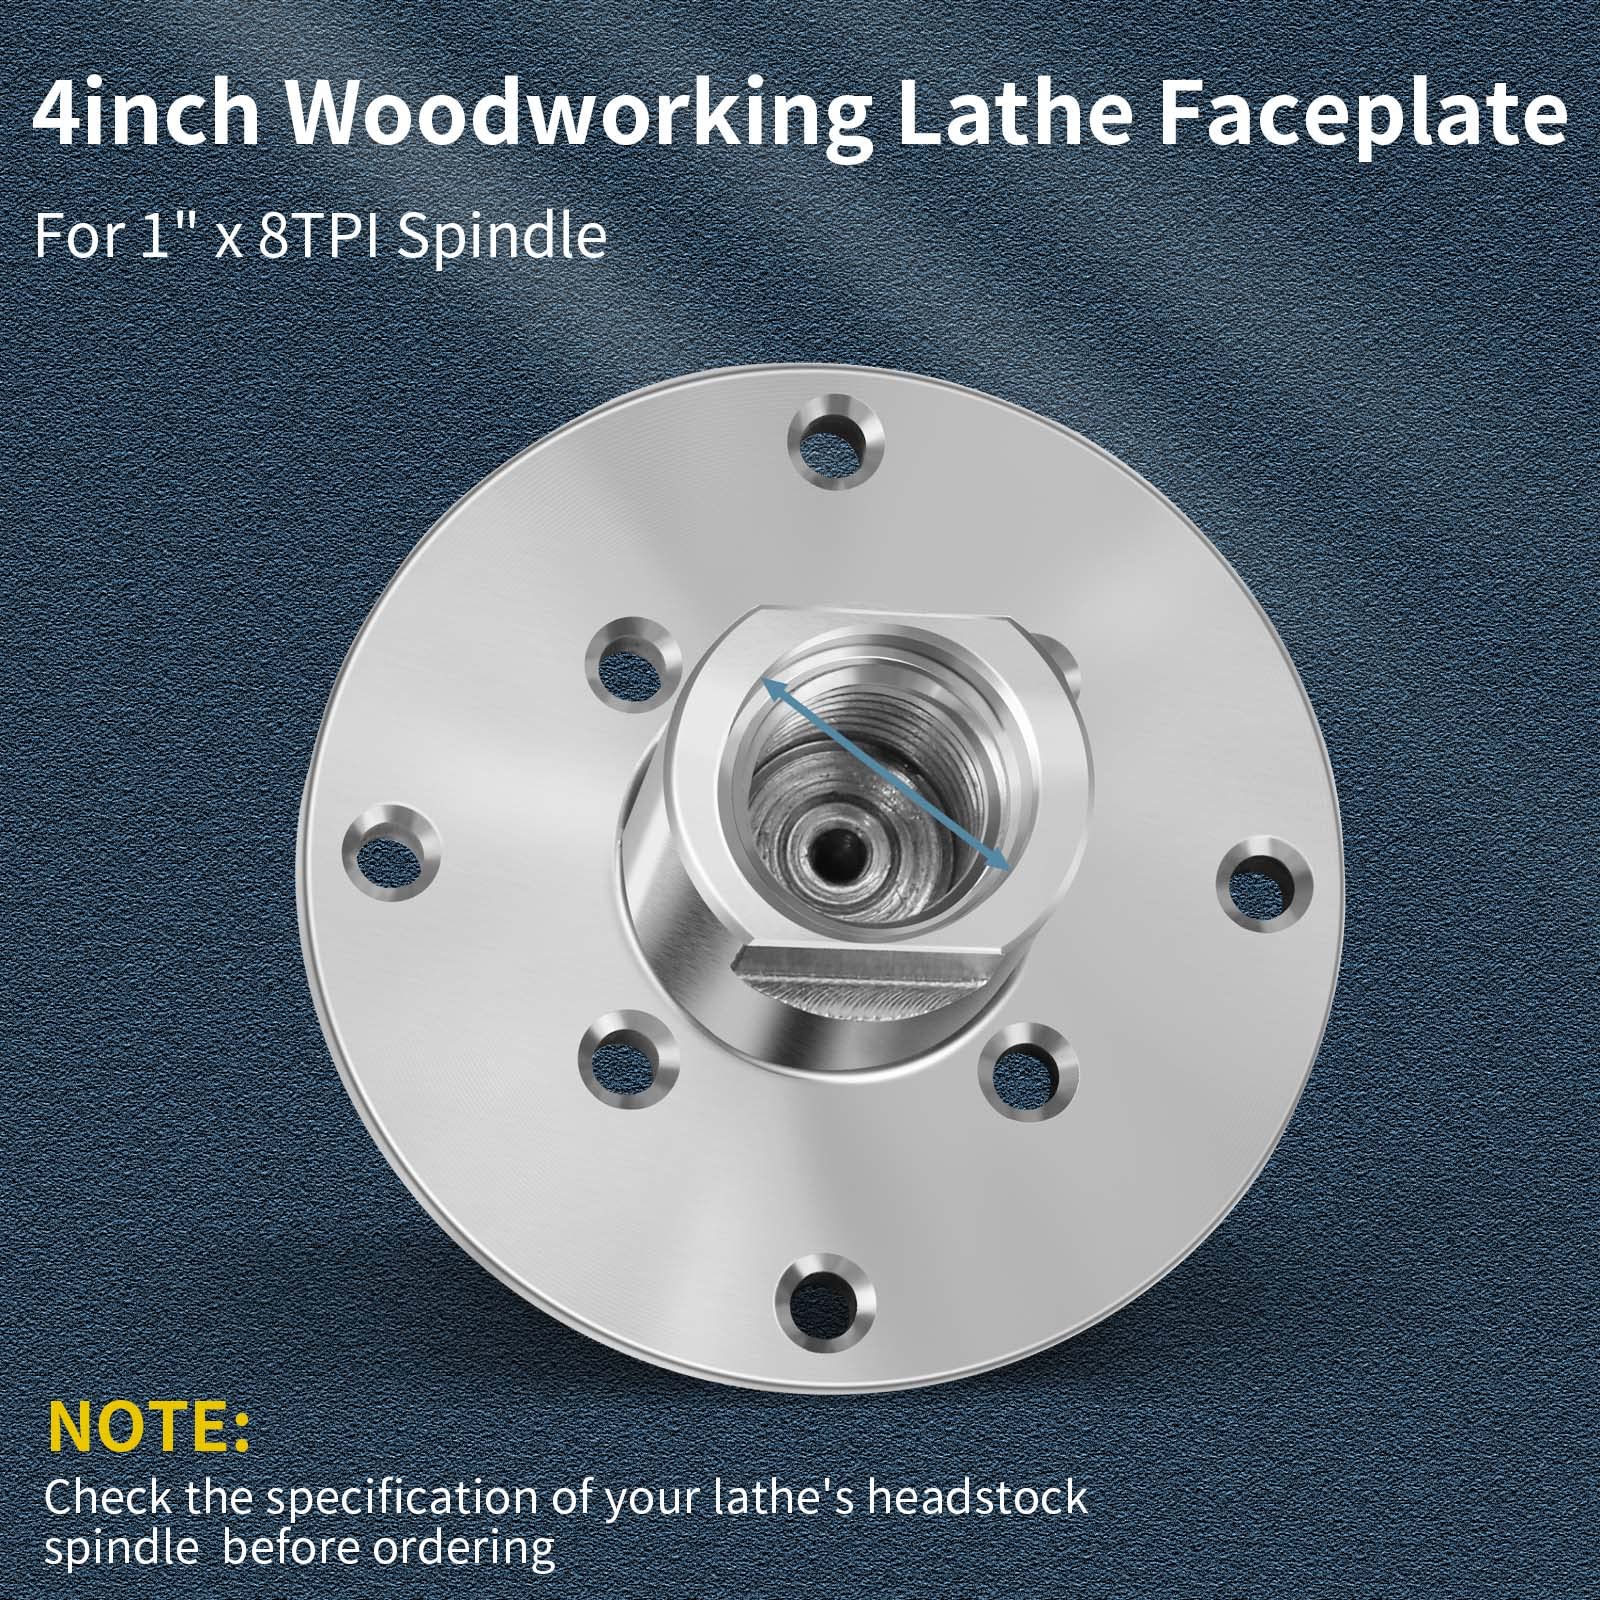 SENDUO Woodworking 4" Lathe Faceplate with Screwchuck,for 1" x 8TPISpindle